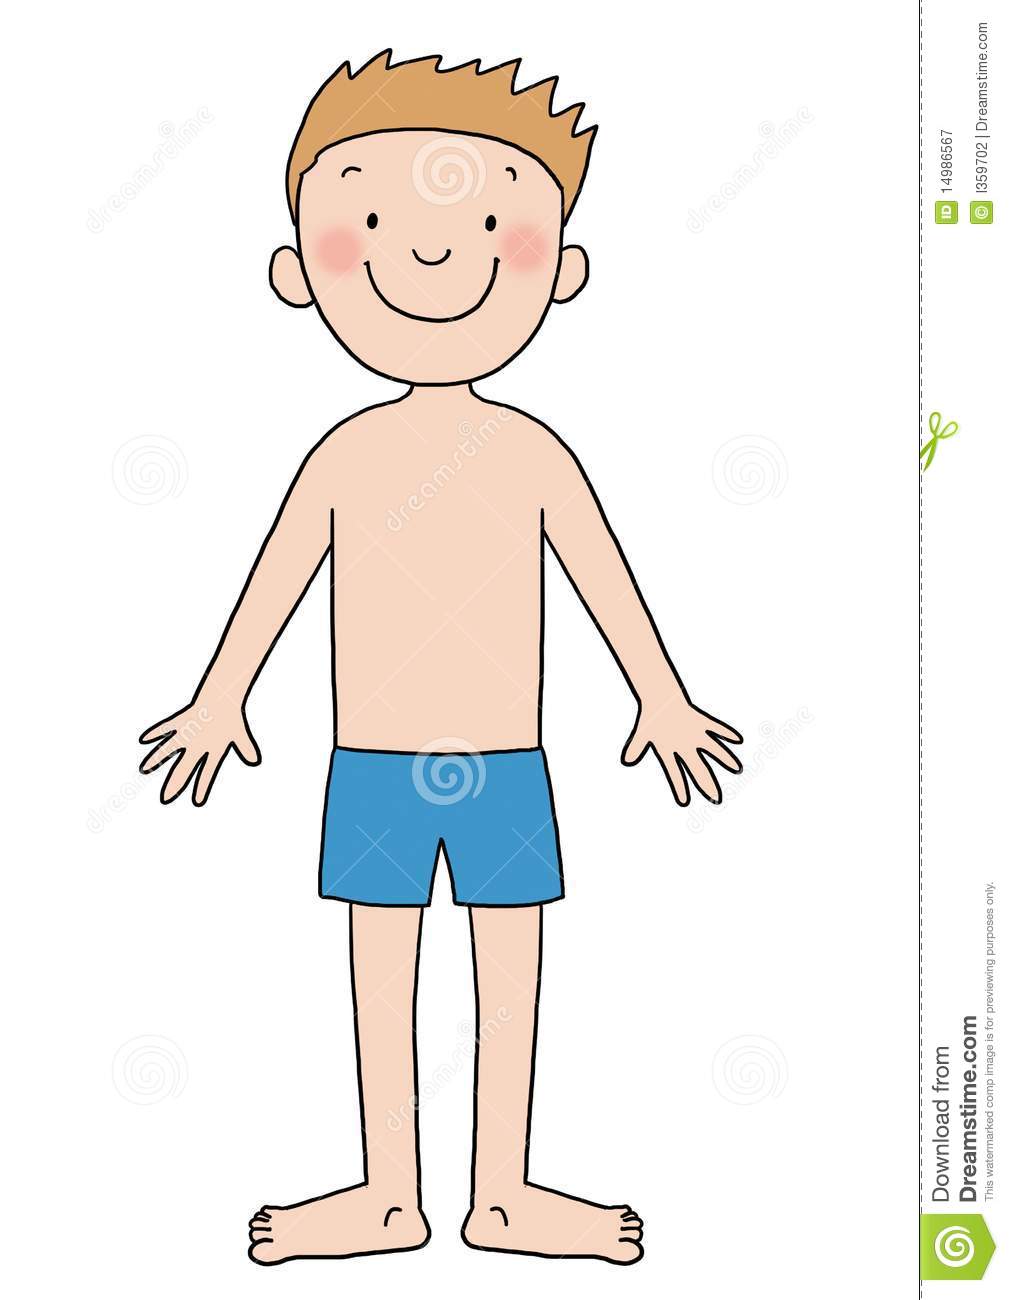 Worksheet For Kindergarten My Body Islamic Clipart 20 Free Cliparts